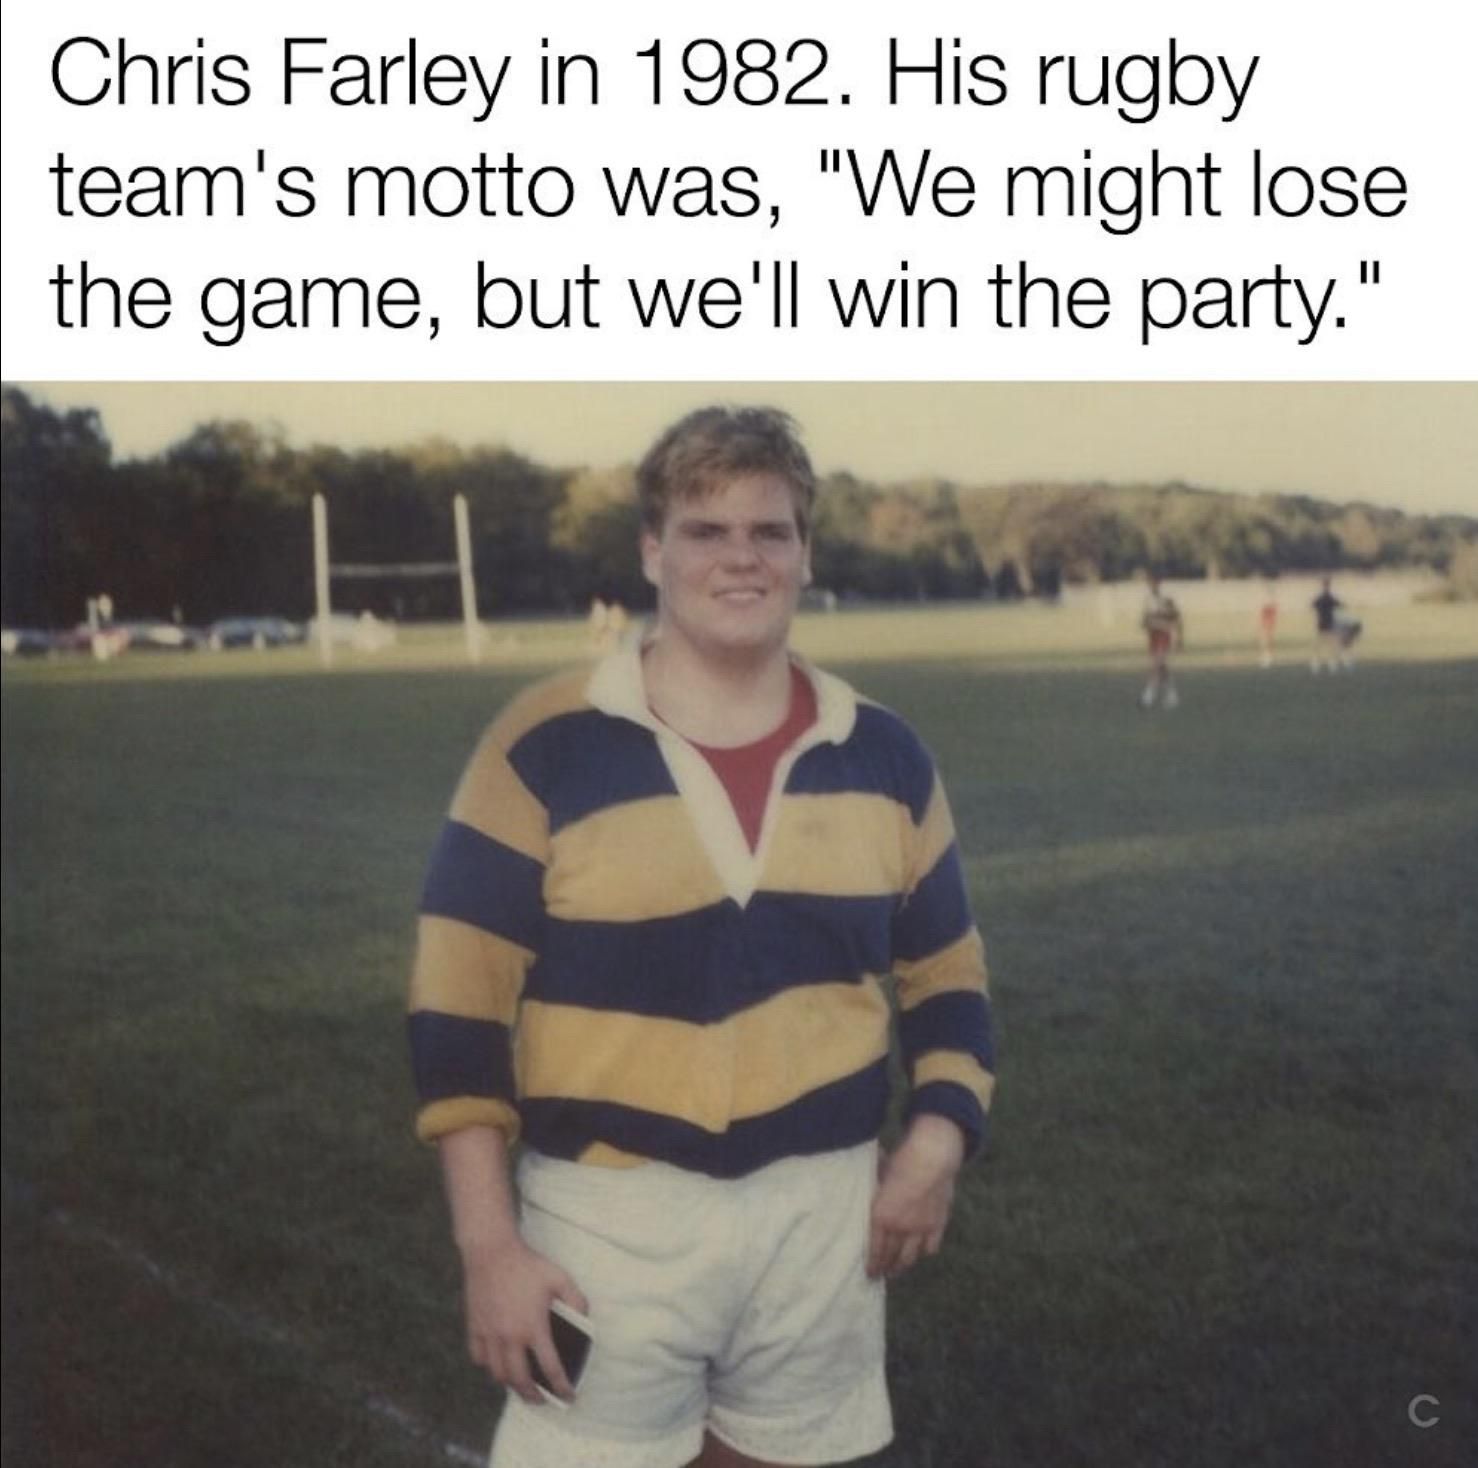 You always win with Farley.